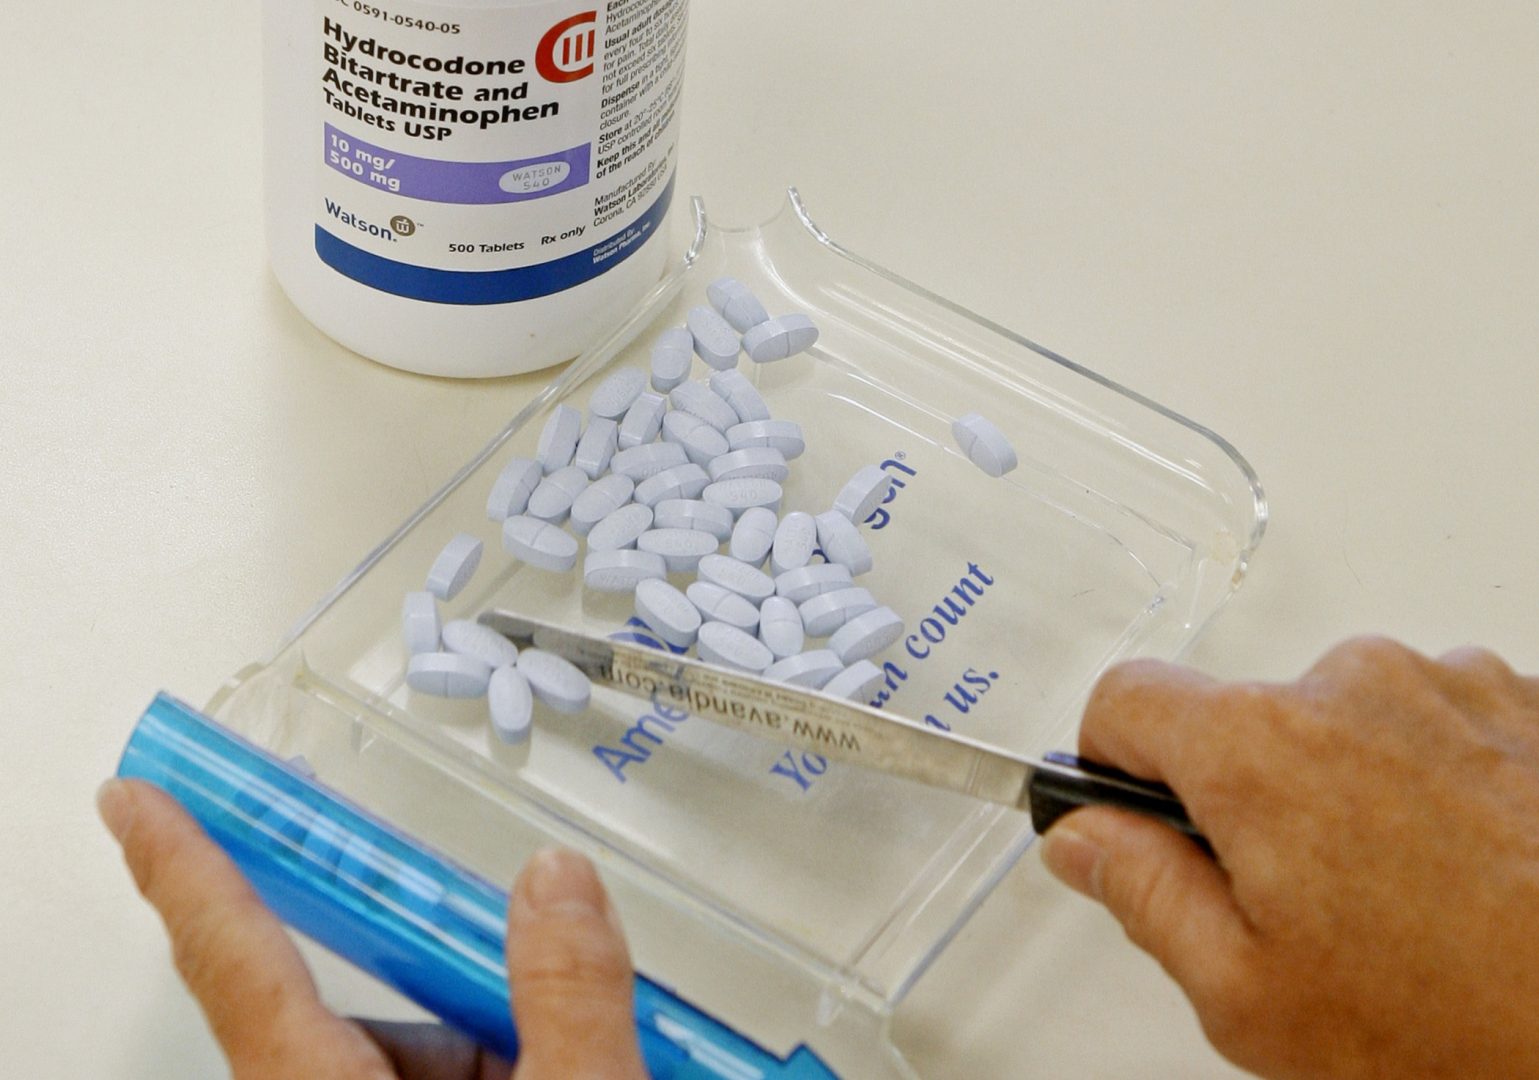 FILE PHOTO: A pharmacy tech poses for a picture with hydrocodone bitartrate and acetaminophen tablets, the generic version of Vicodin in Edmond, Okla. 